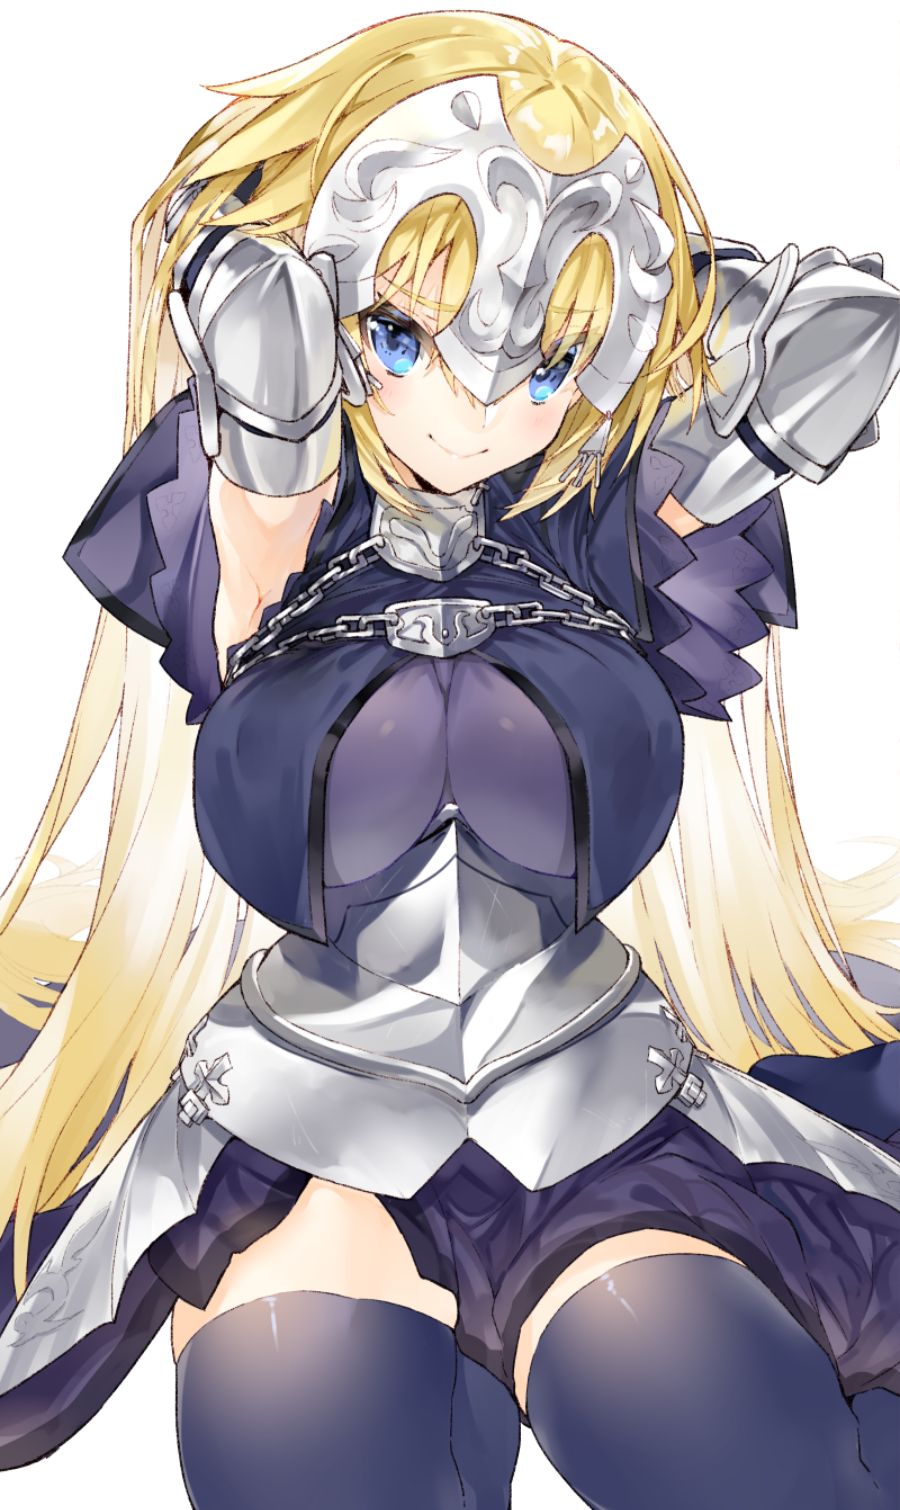 __jeanne_d_arc_and_jeanne_d_arc_fate_grand_order_and_etc_drawn_by_kou_mashiro__37c54b43e4fa80477d10b800b486c3ea.png